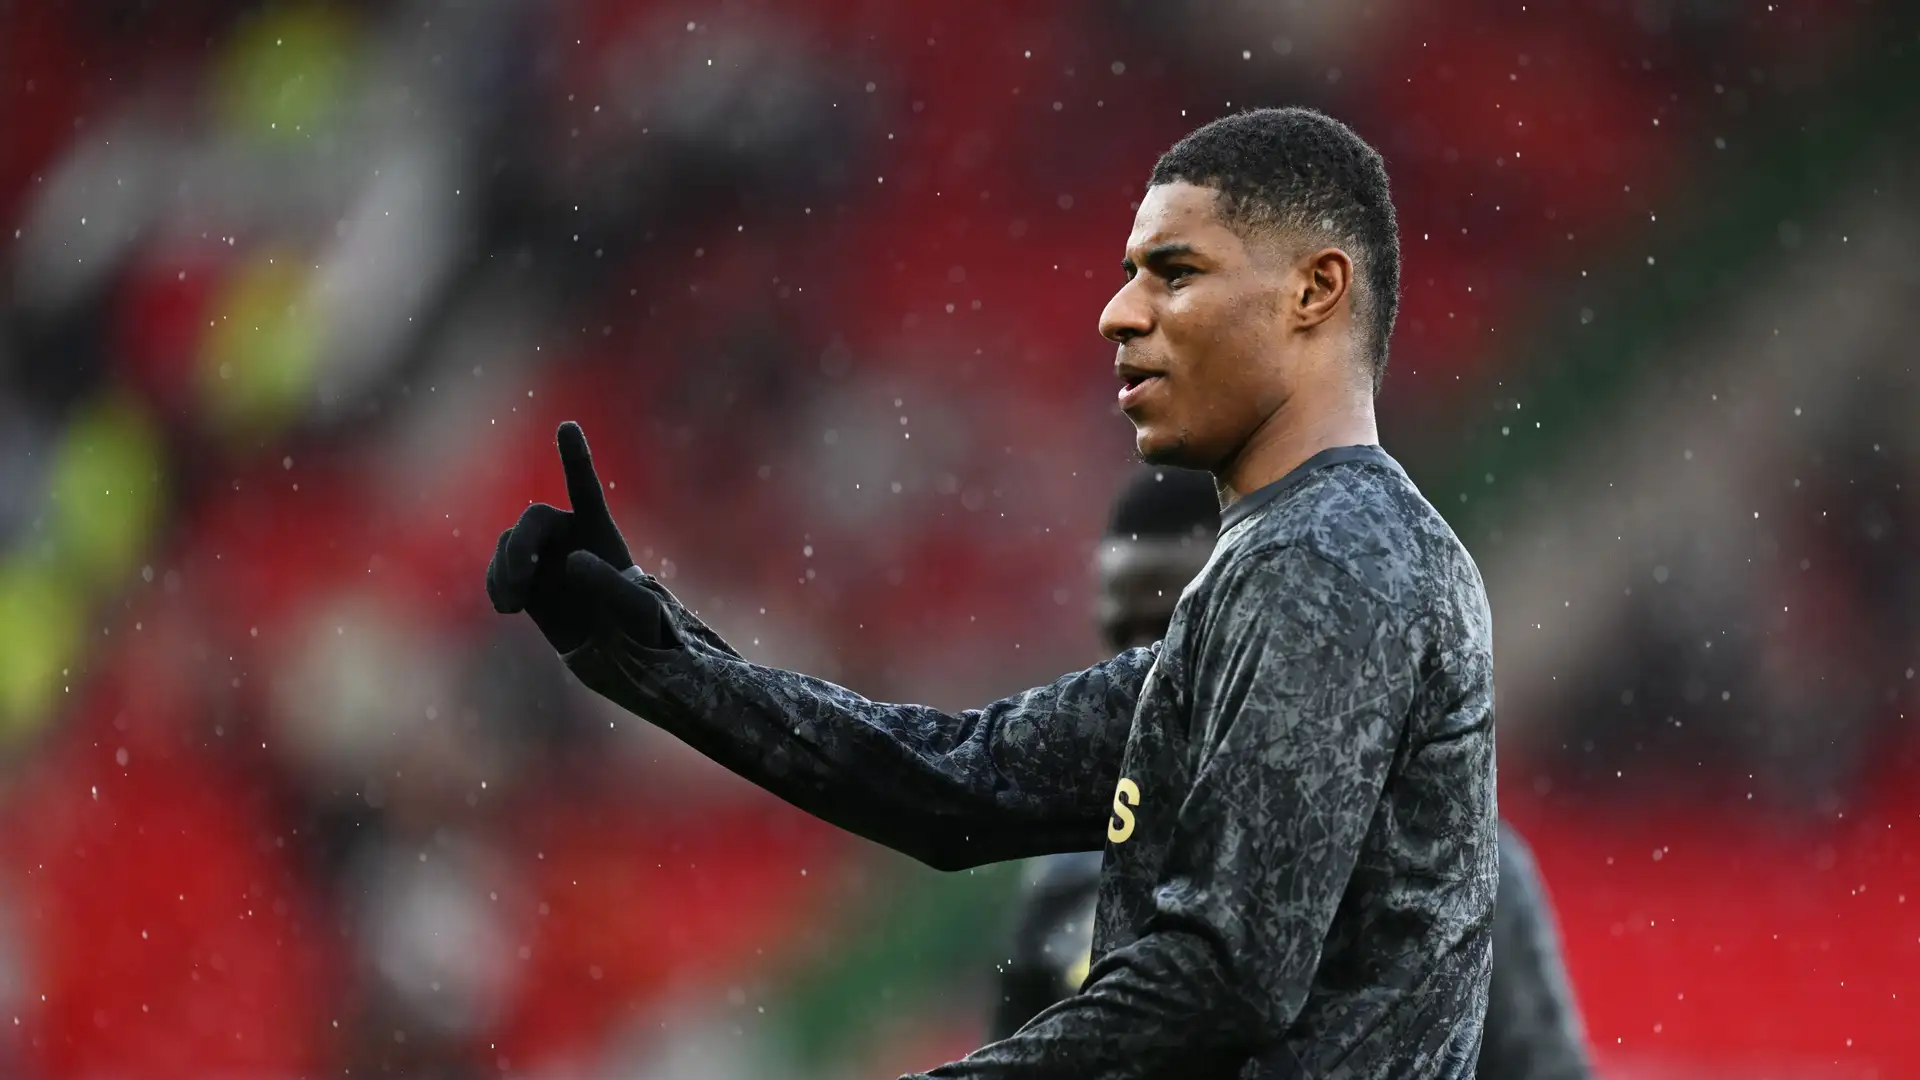 Revealed: What Man Utd fan said to Marcus Rashford in confrontation with striker ahead of Newcastle clash